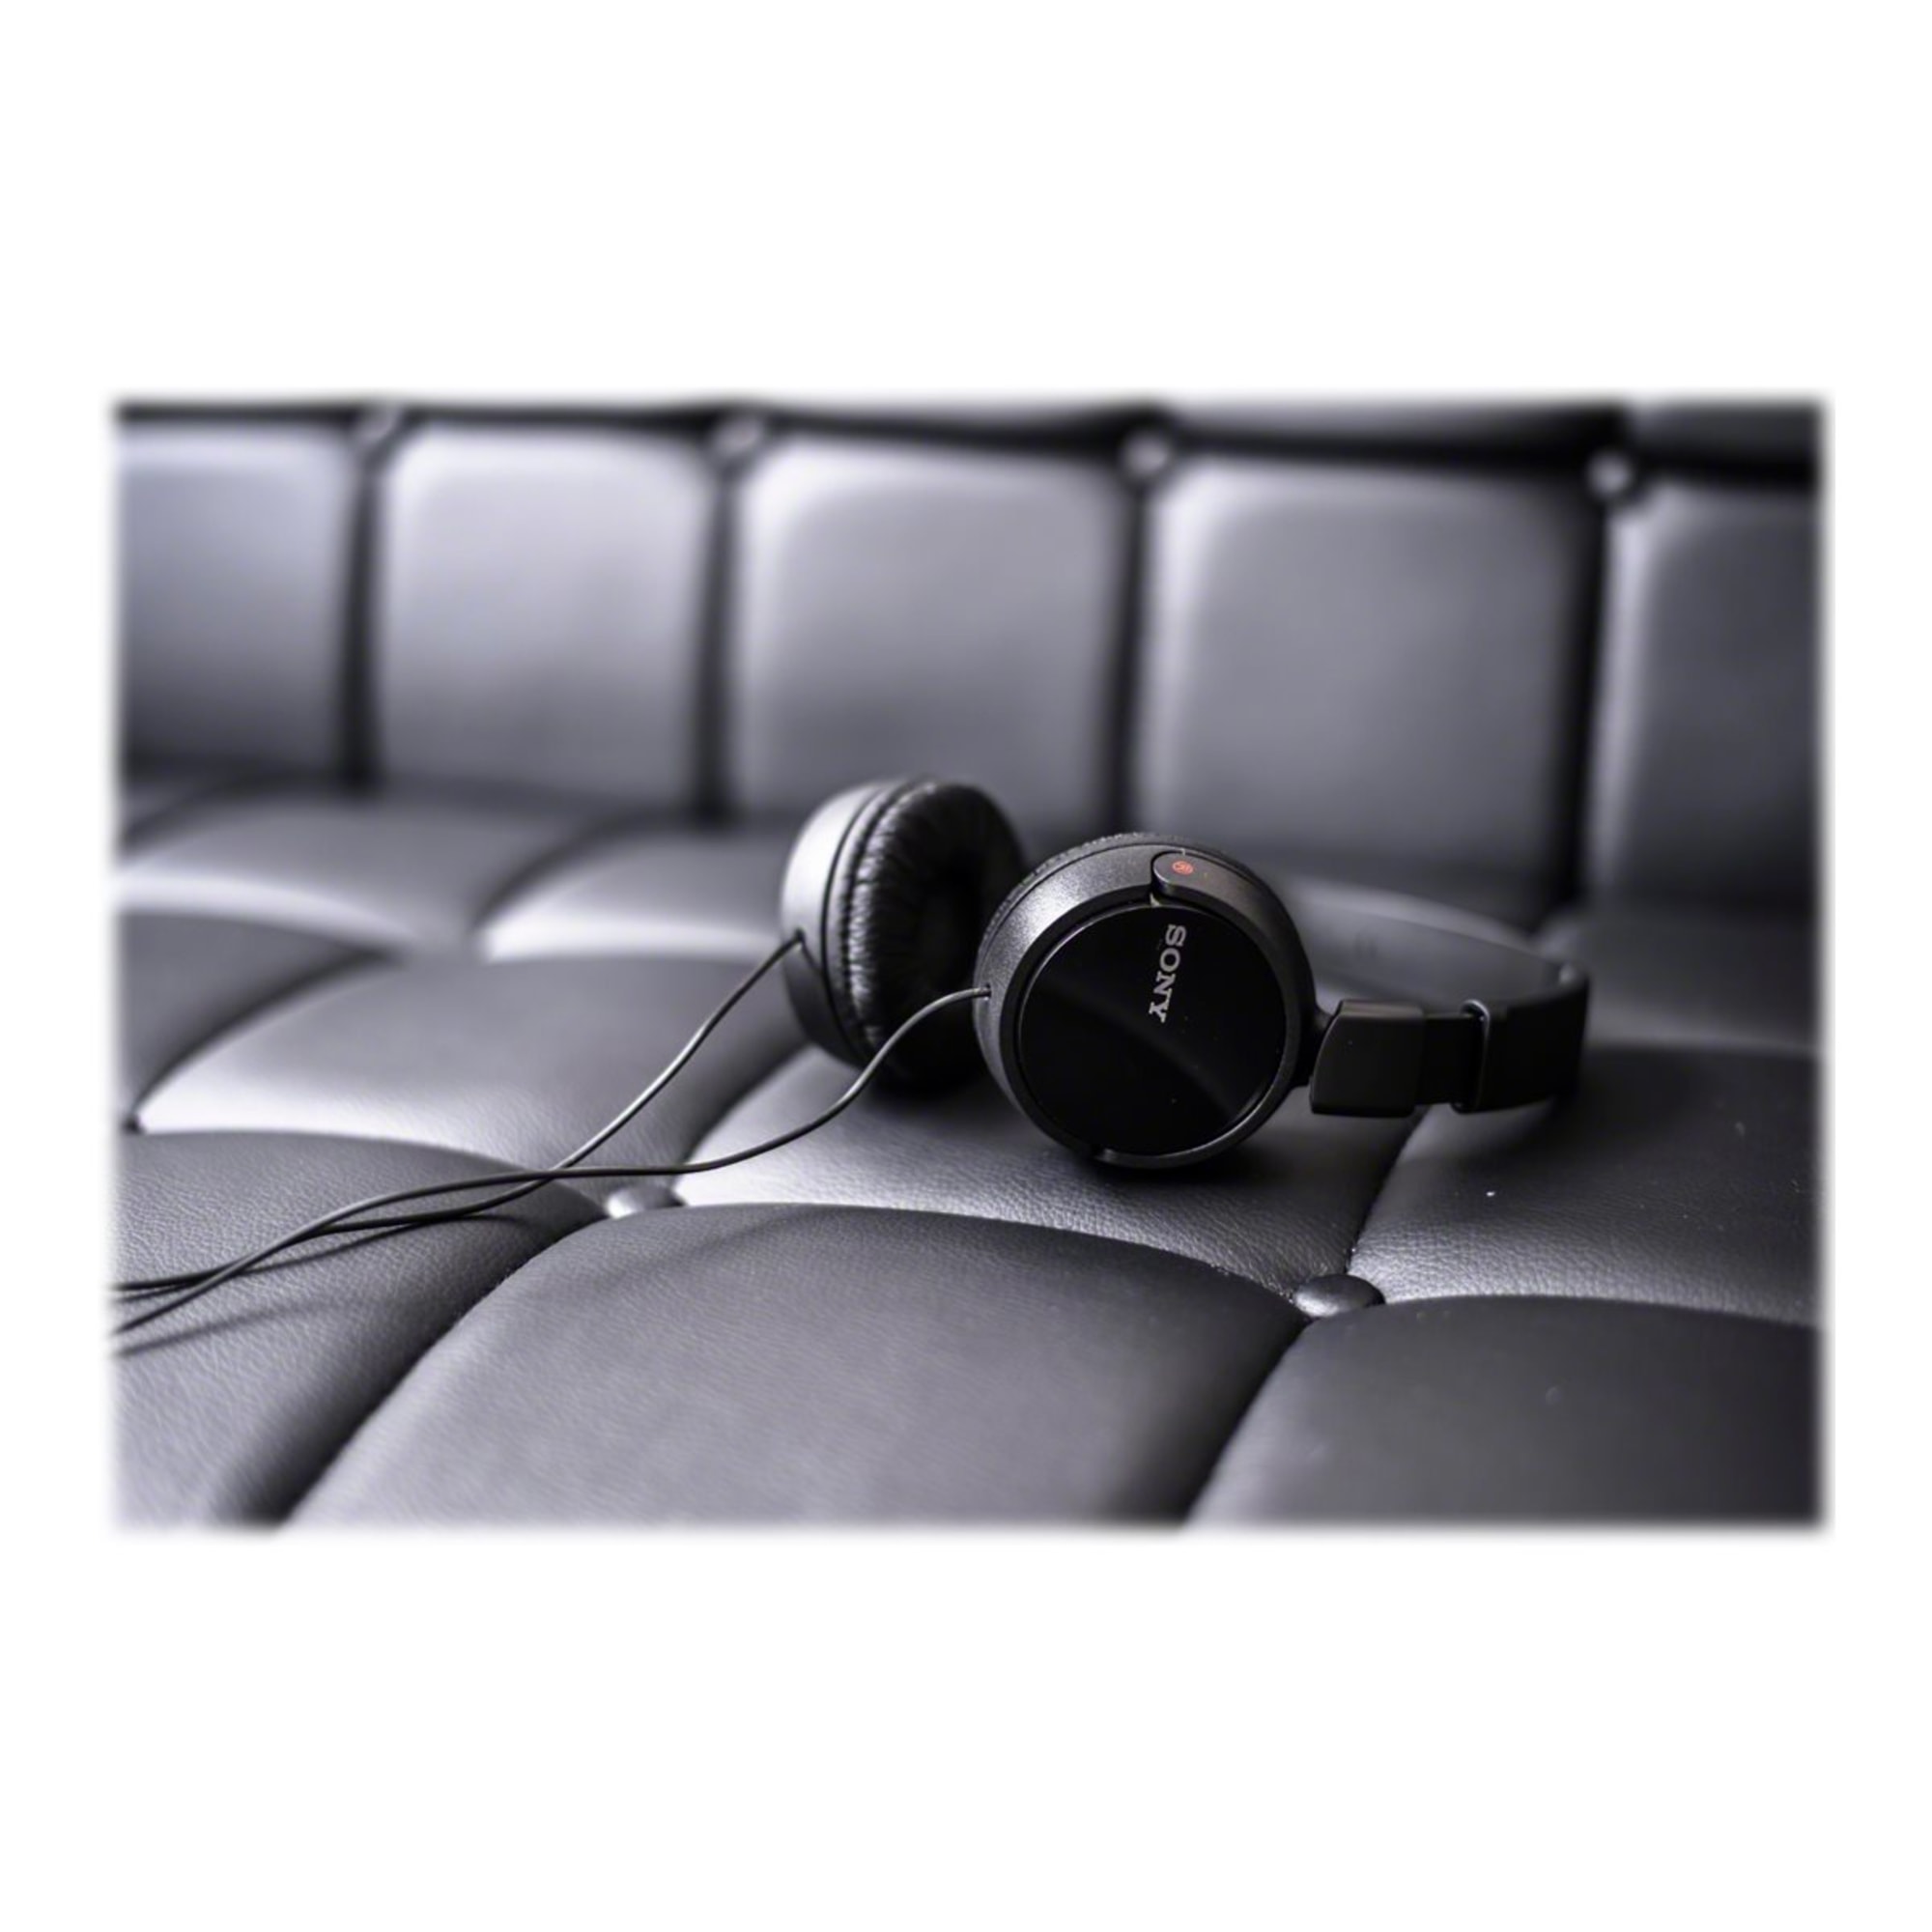 Sony MDR-ZX110AP EXTRA BASS Headphones with Mic- Black - image 3 of 3